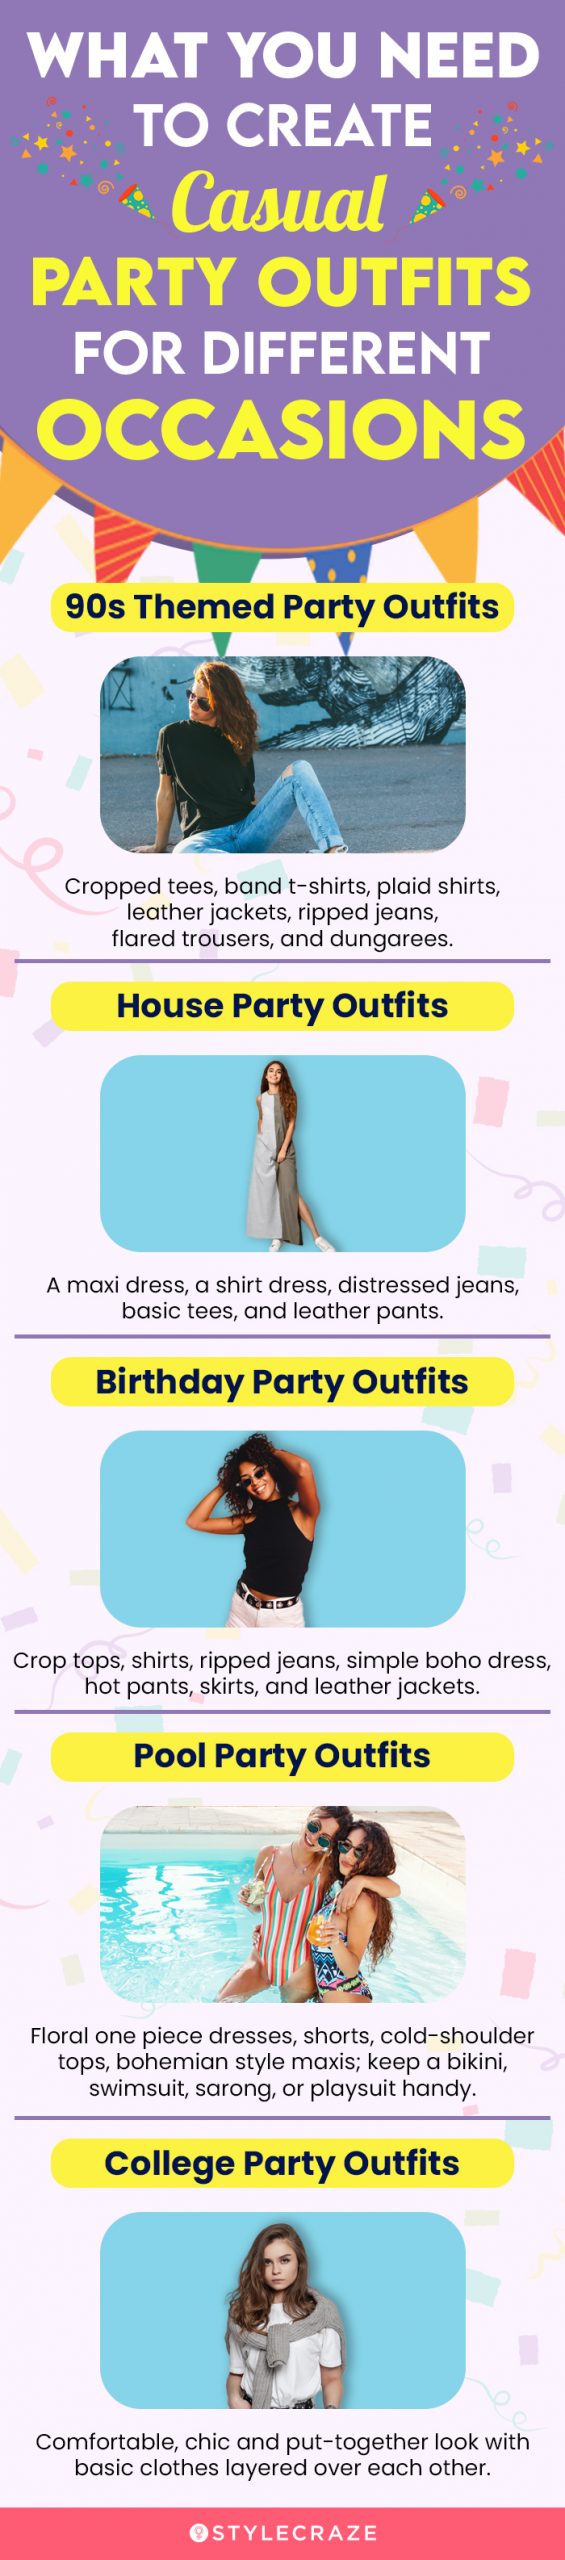 what you need to create casual party outfits for different occasions (infographic)